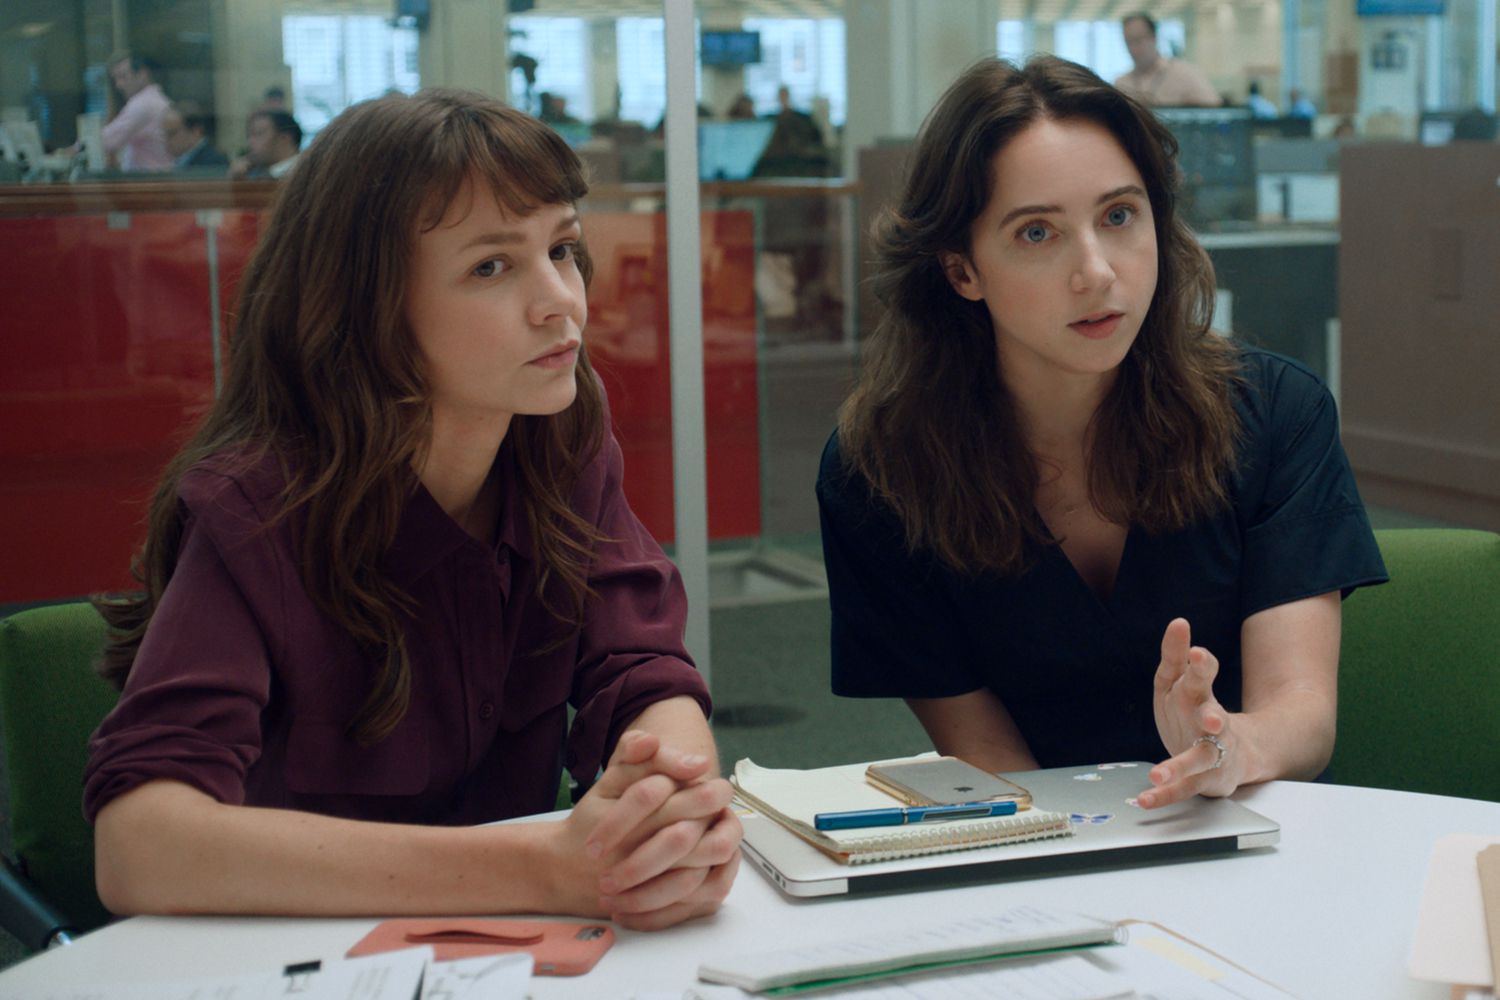 (from left) Megan Twohey (Carey Mulligan) and Jodi Kantor (Zoe Kazan) in She Said, directed by Maria Schrader